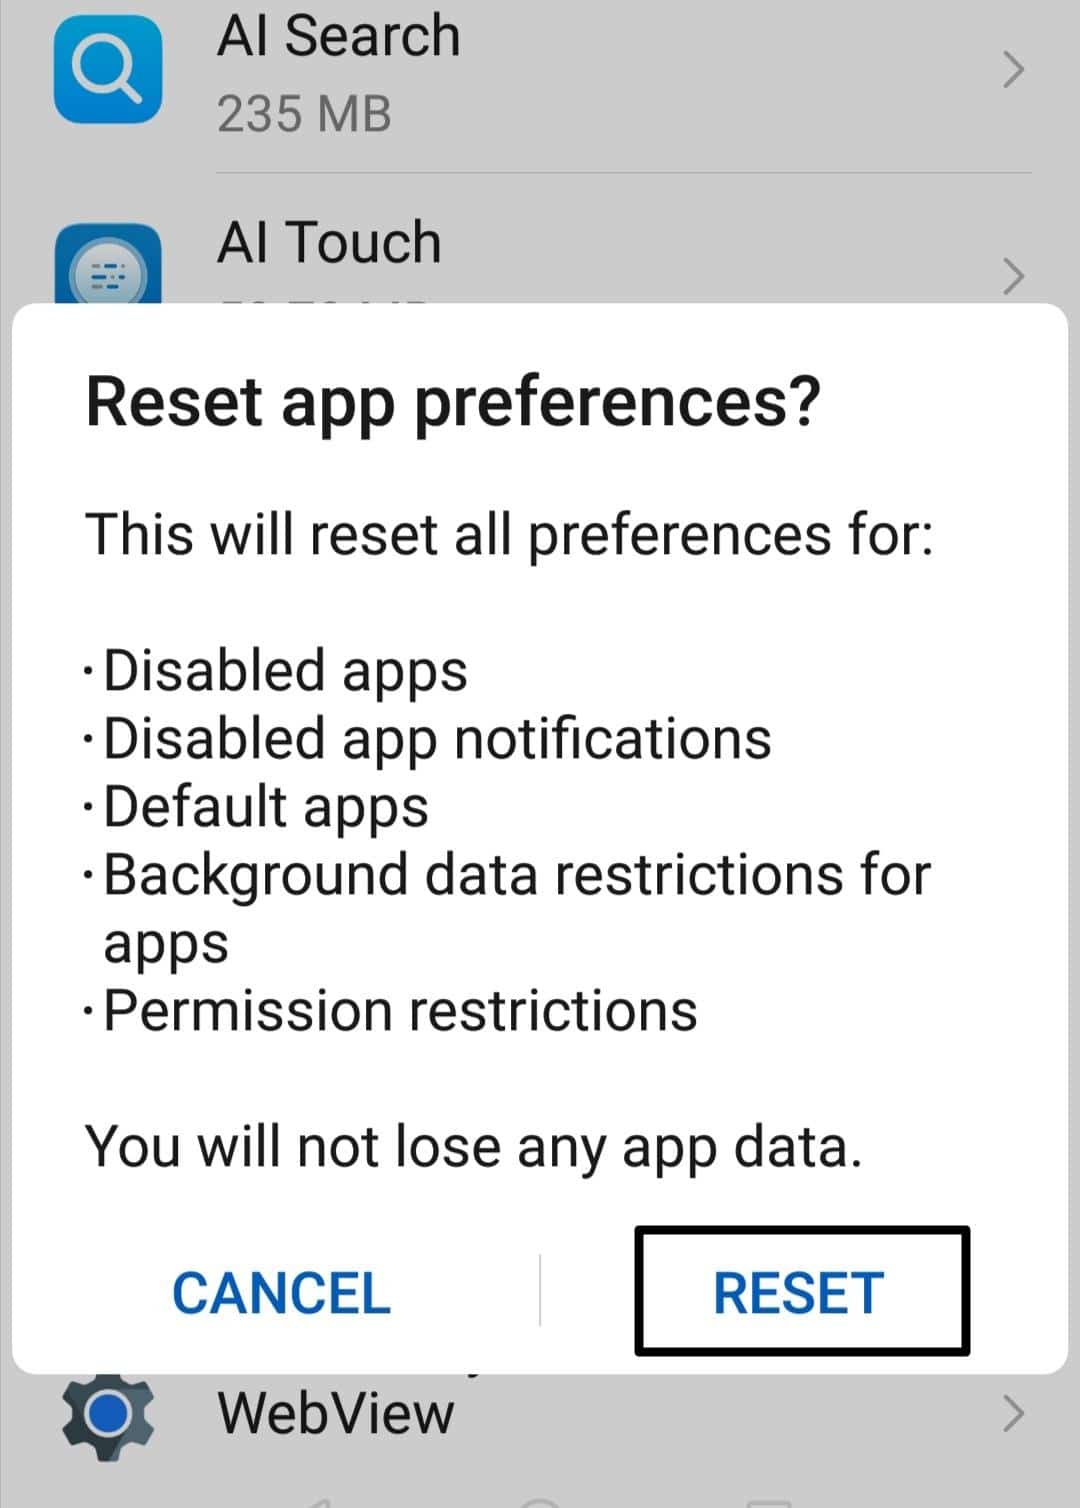 Reset app preferences on Android to fix Instagram 'No internet connection' or 'An unknown network error has occurred'